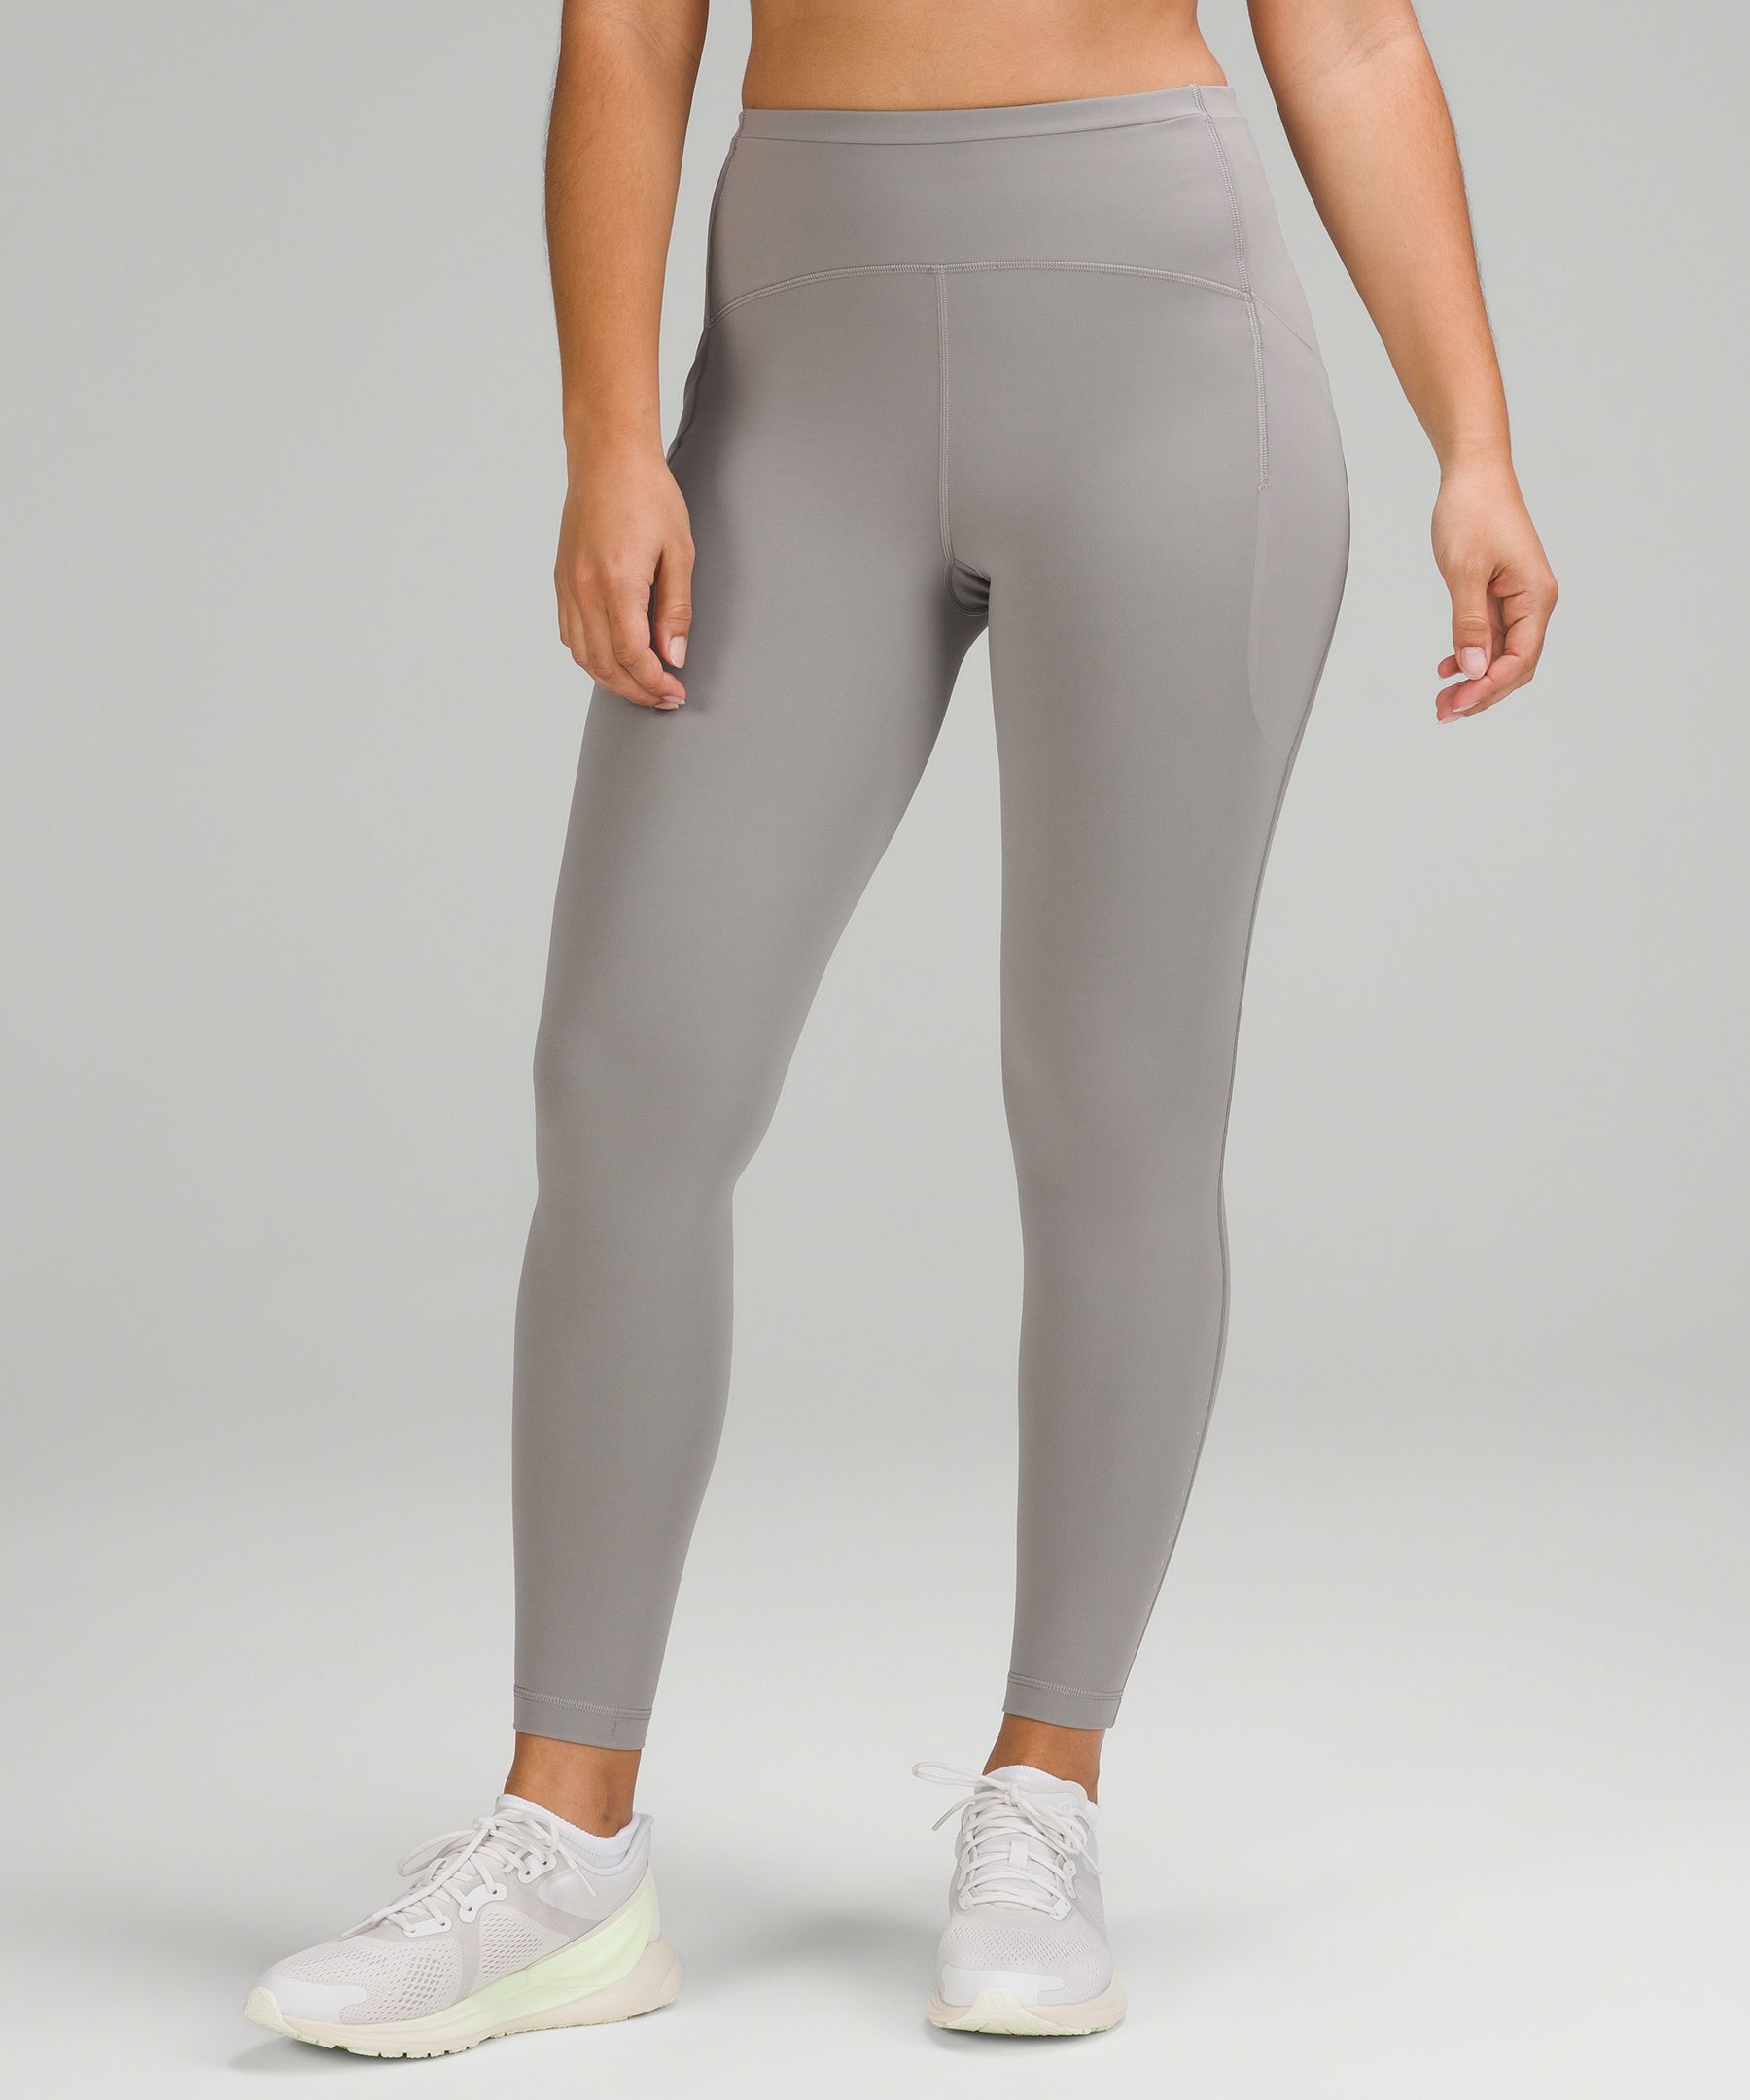 Swift Speed High-Rise Tight 28 *Brushed Luxtreme, Women's Pants